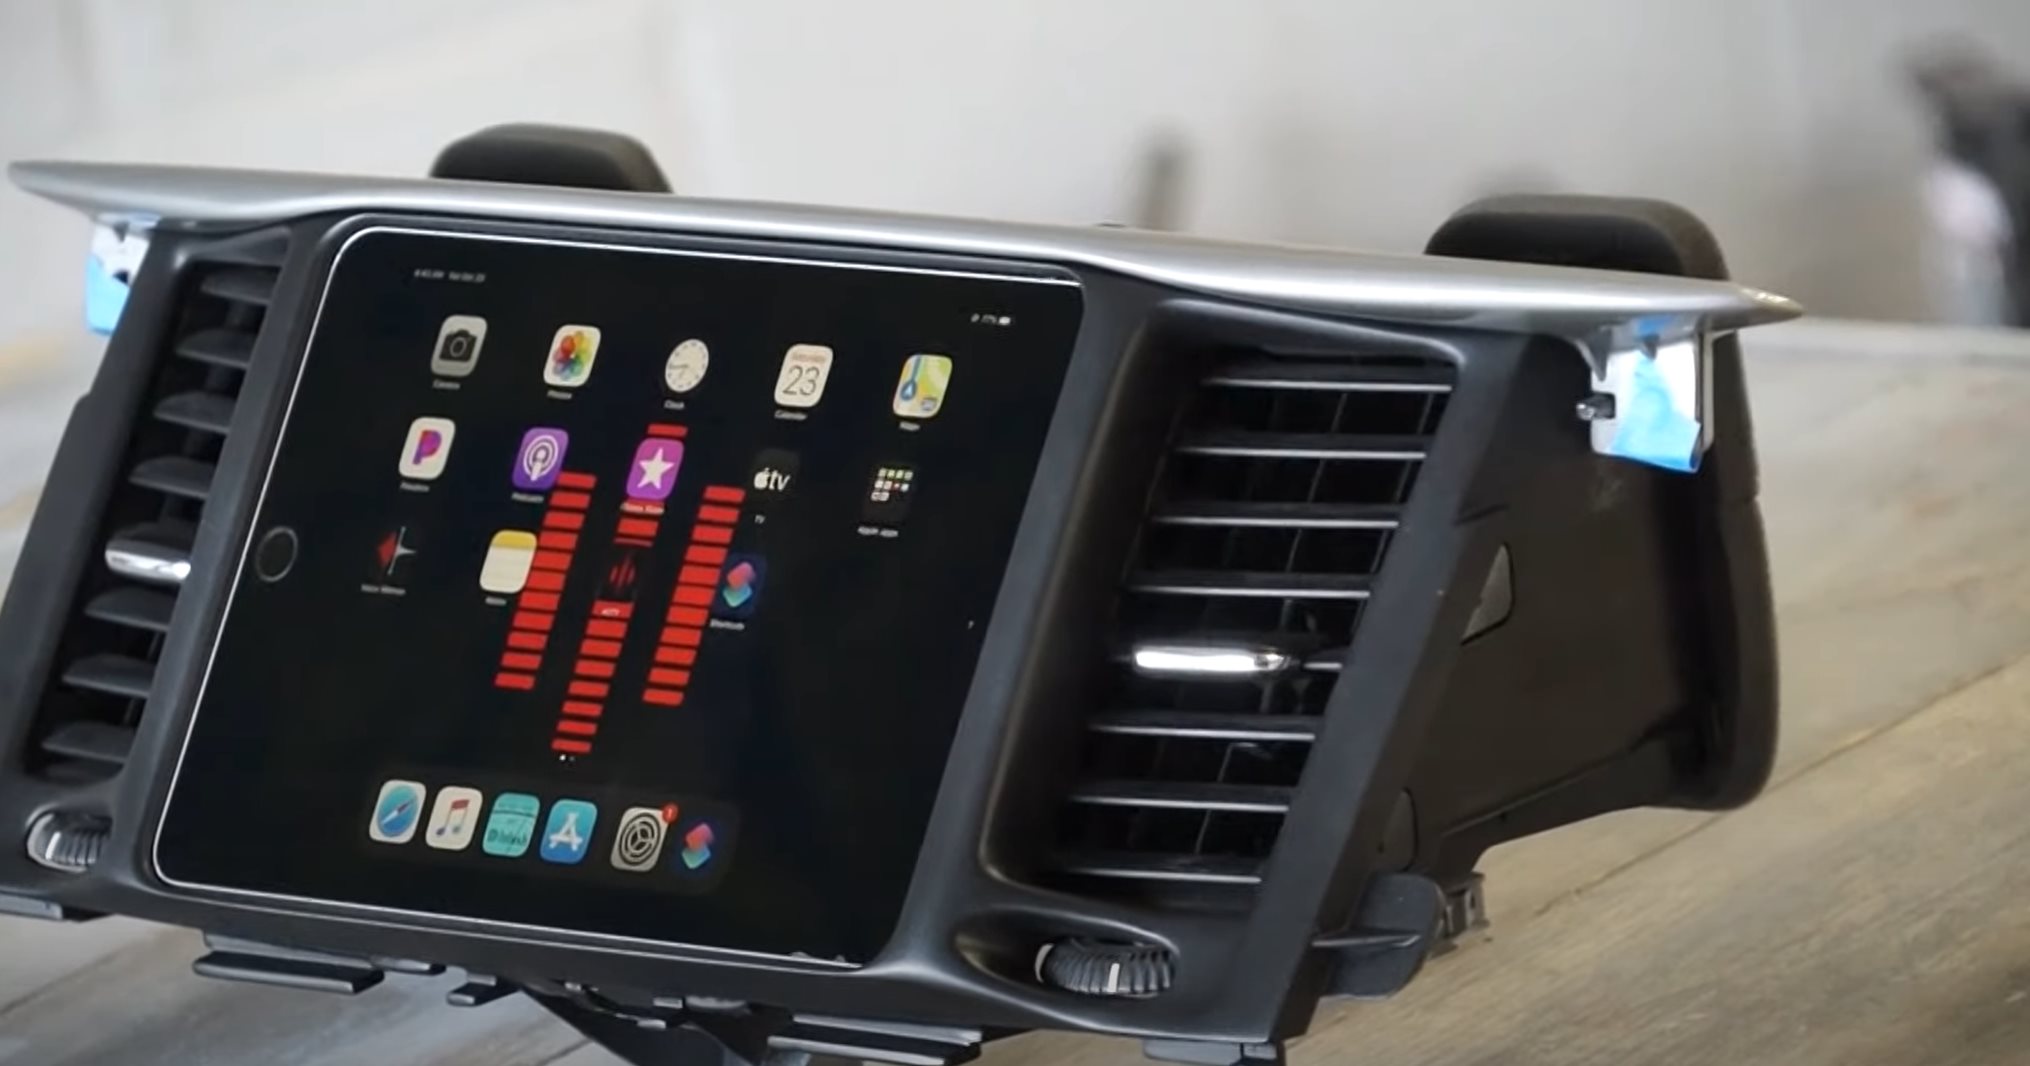 https://s1.cdn.autoevolution.com/images/news/gallery/this-custom-dash-proves-nobody-needs-carplay-when-an-ipad-can-do-so-much-more_1.jpg